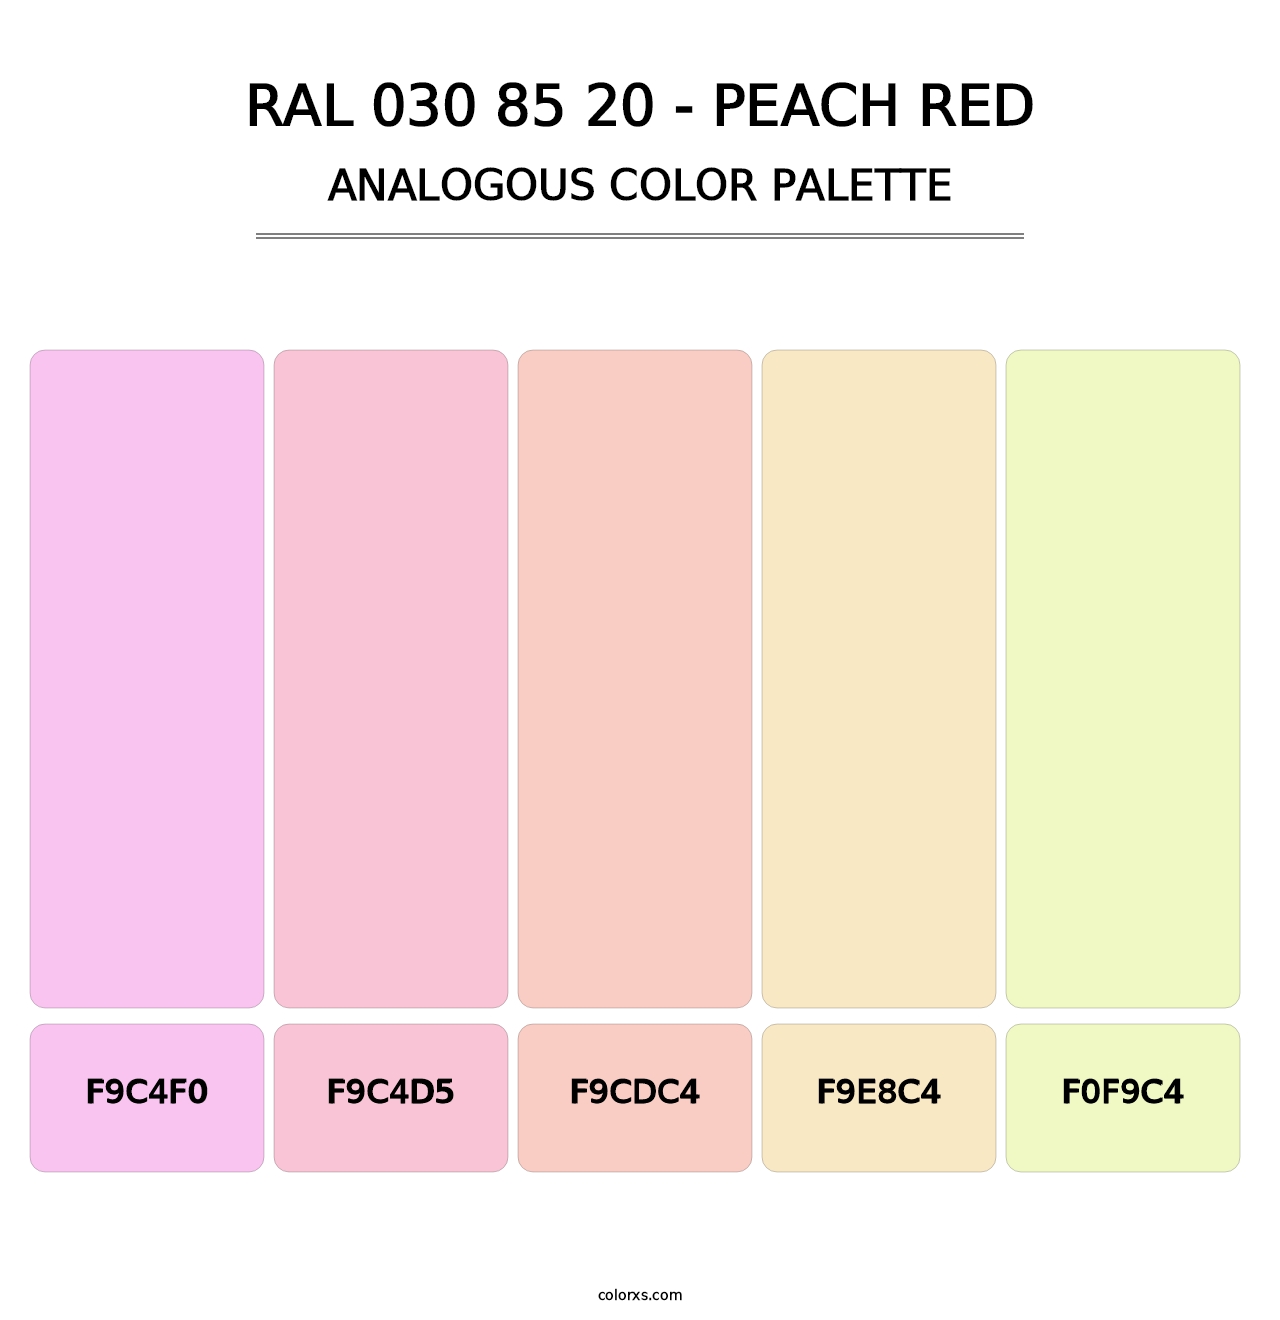 RAL 030 85 20 - Peach Red - Analogous Color Palette